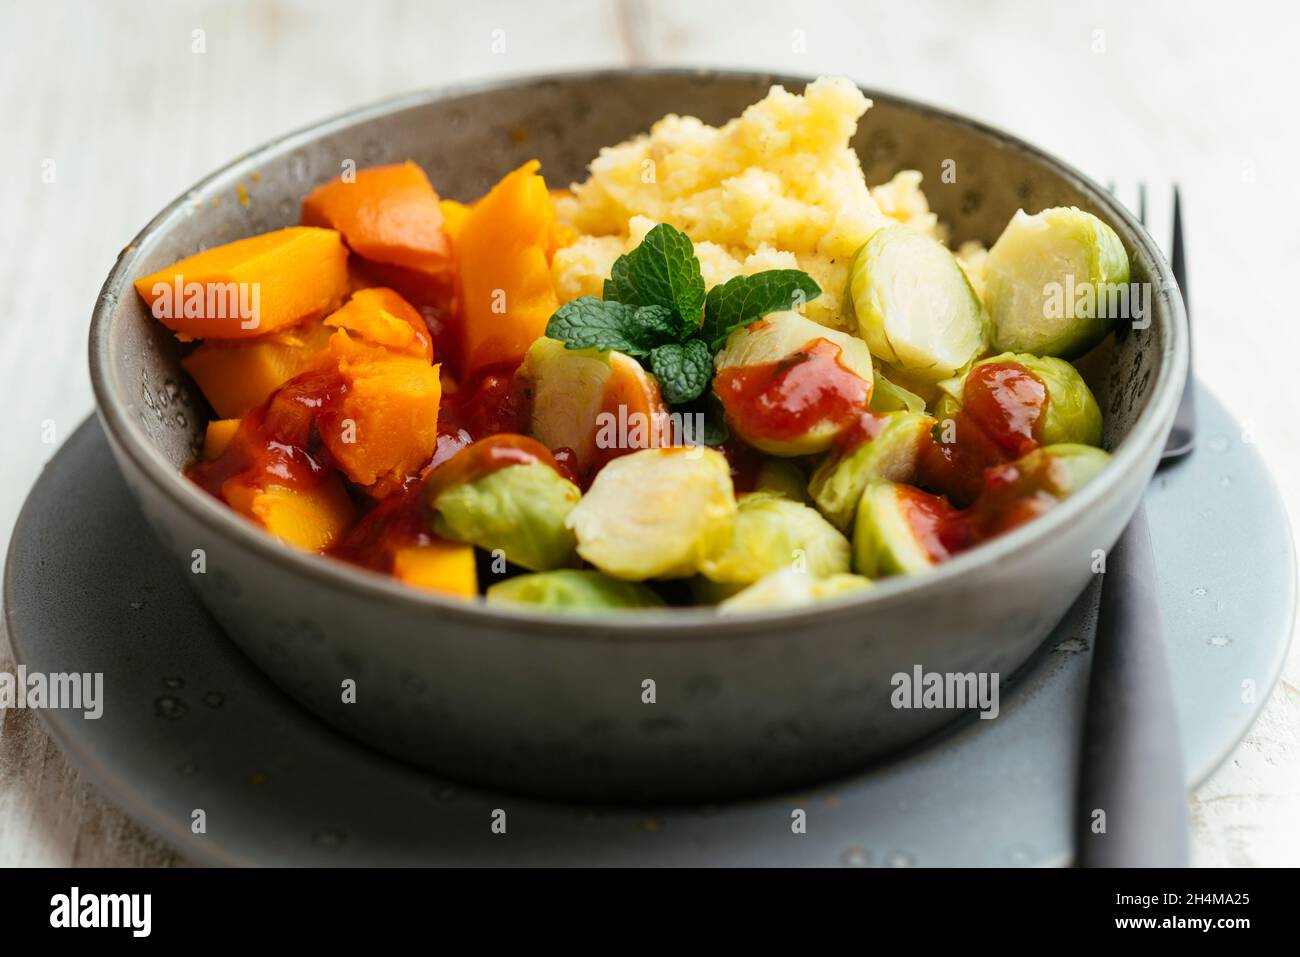 Home made dish with winter squash, Brussels sprouts, mashed potatoes and a sweet and spicy sauce. Stock Photo